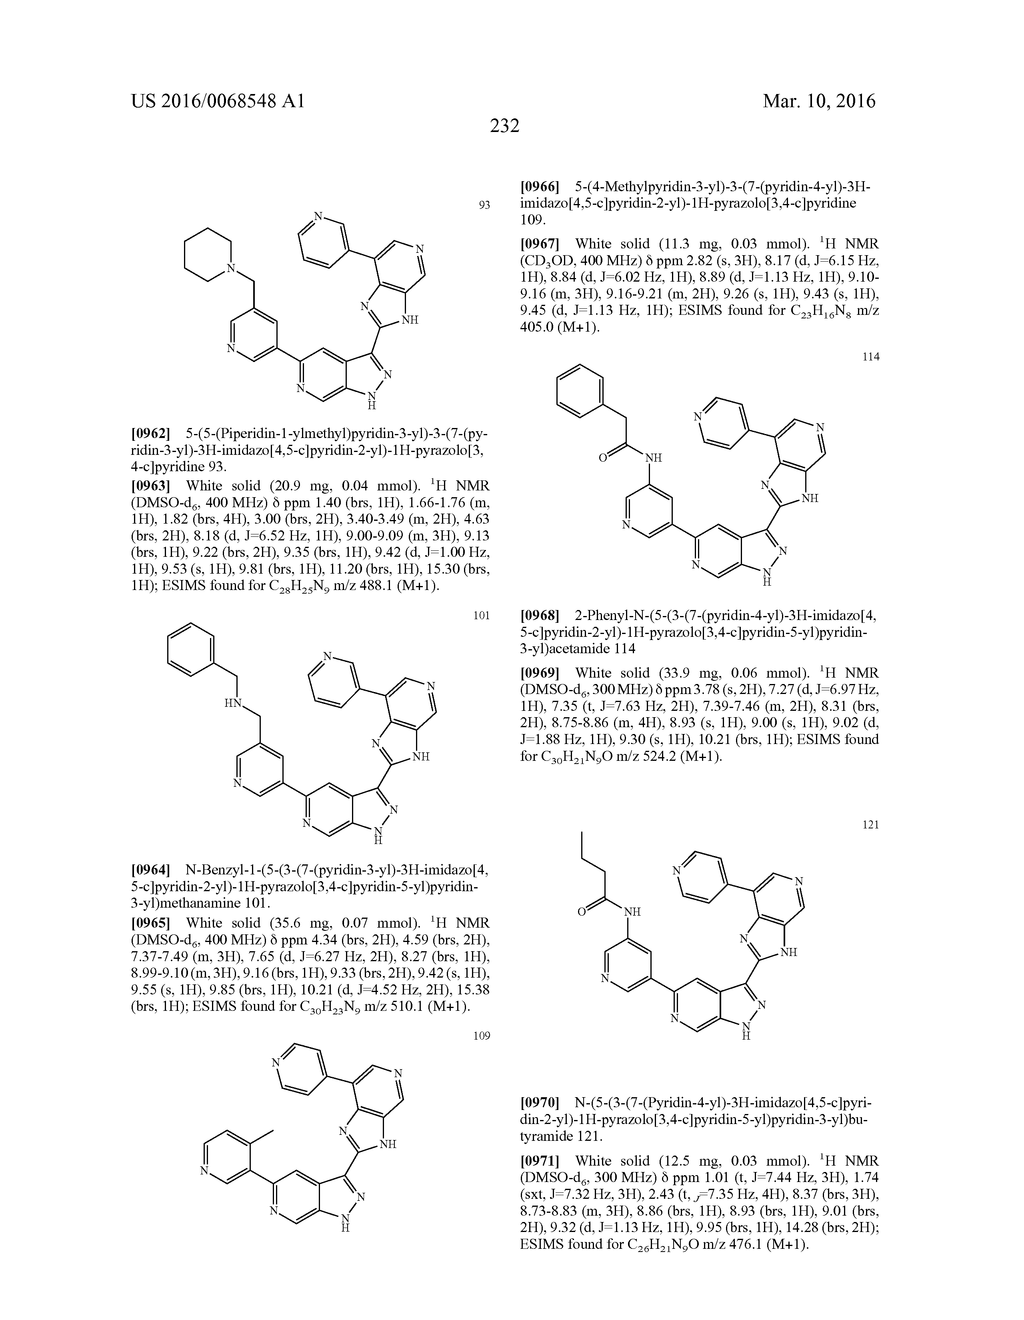 3-(3H-IMIDAZO[4,5-C]PYRIDIN-2-YL)-1H-PYRAZOLO[3,4-C]PYRIDINE AND     THERAPEUTIC USES THEREOF - diagram, schematic, and image 233